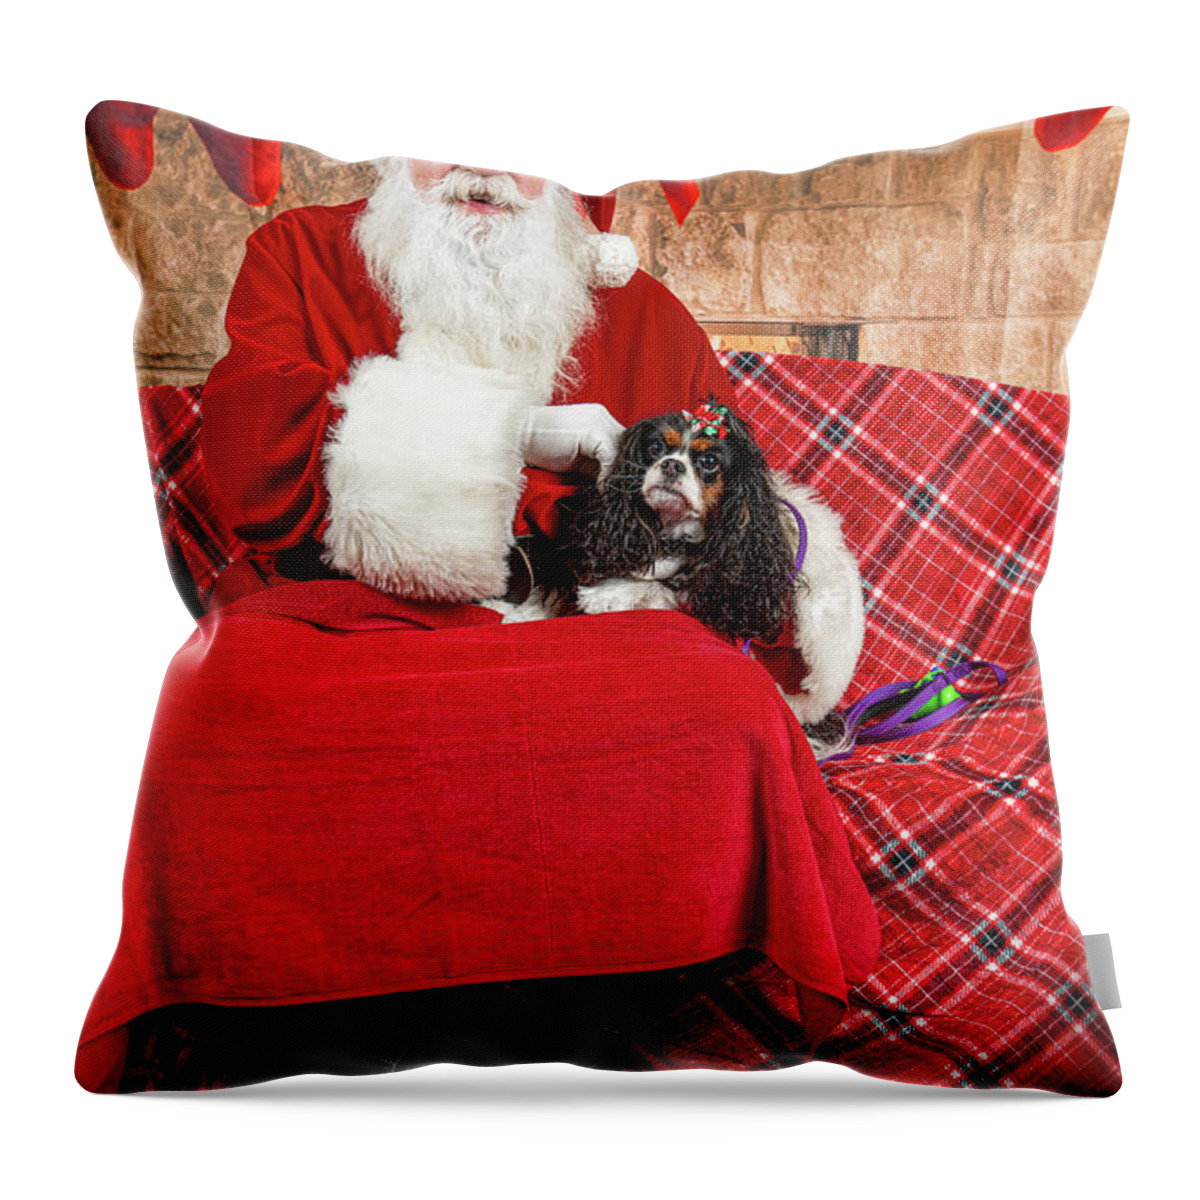 Peppermint Throw Pillow featuring the photograph Peppermint with Santa 1 by Christopher Holmes